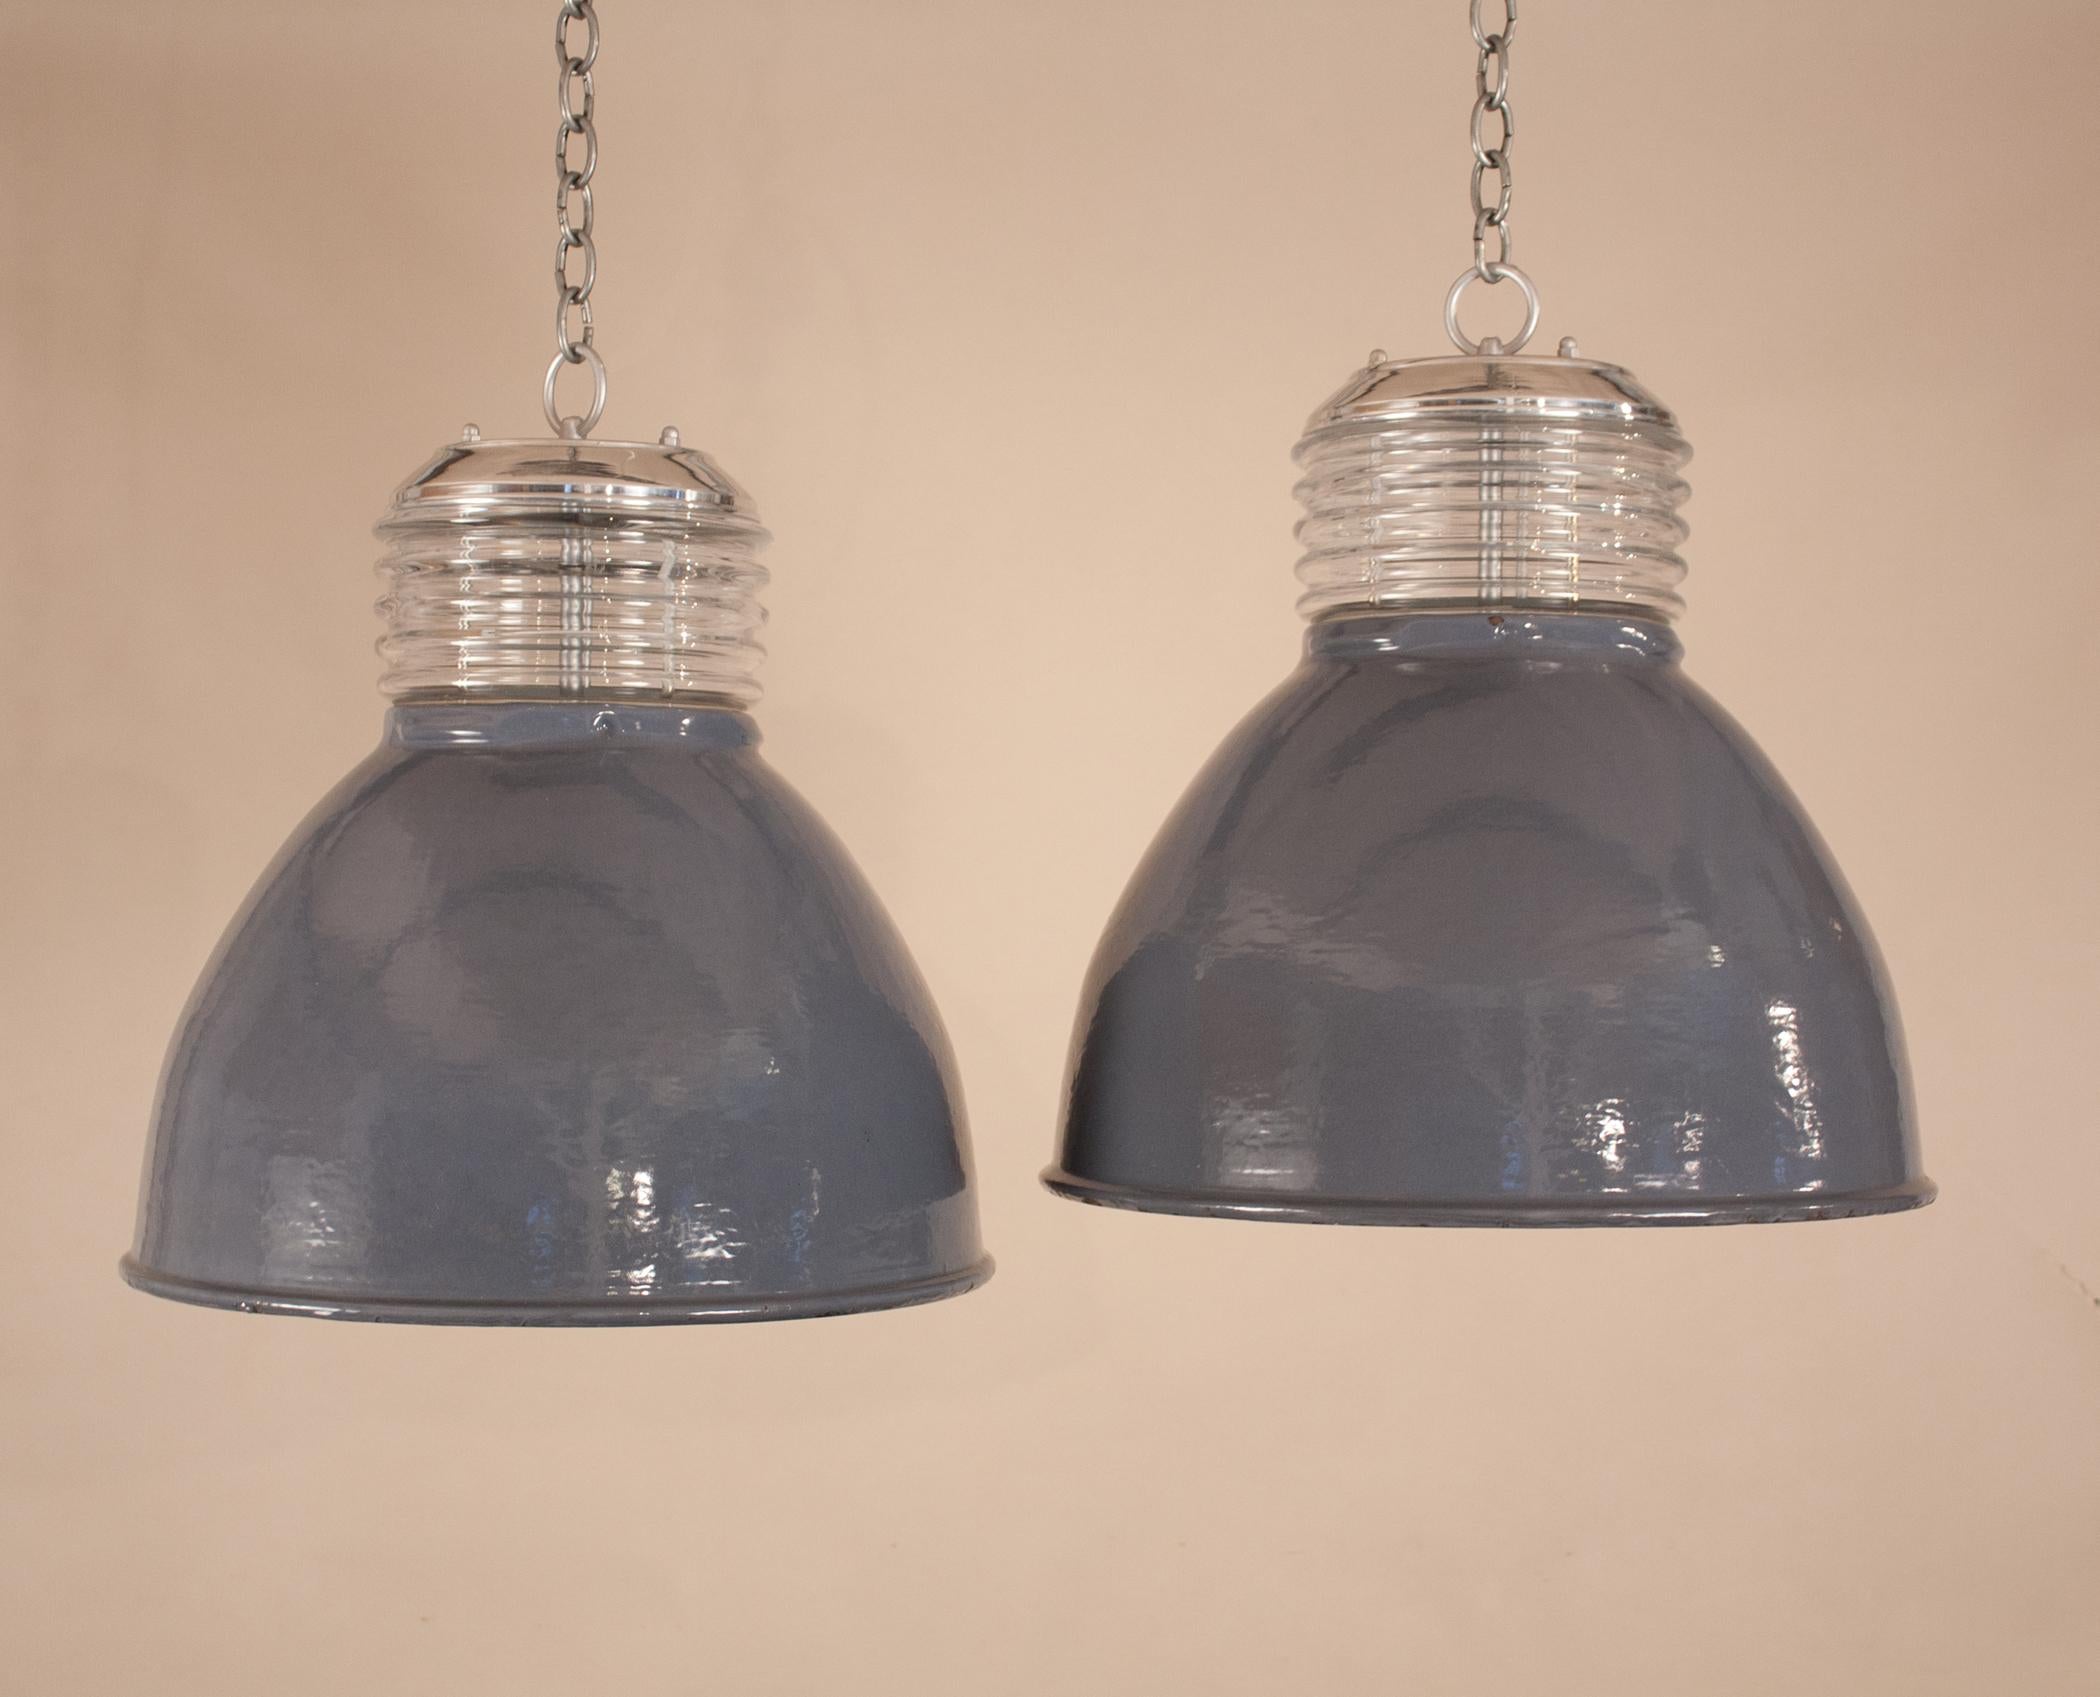 Custom-designed from vintage components, these larger-sized Industrial pendants are one-of-a-kind. The gray enamel shades with white interiors are from the 1960s. With their age comes expected minor blemishes (as shown in photos) that add to the